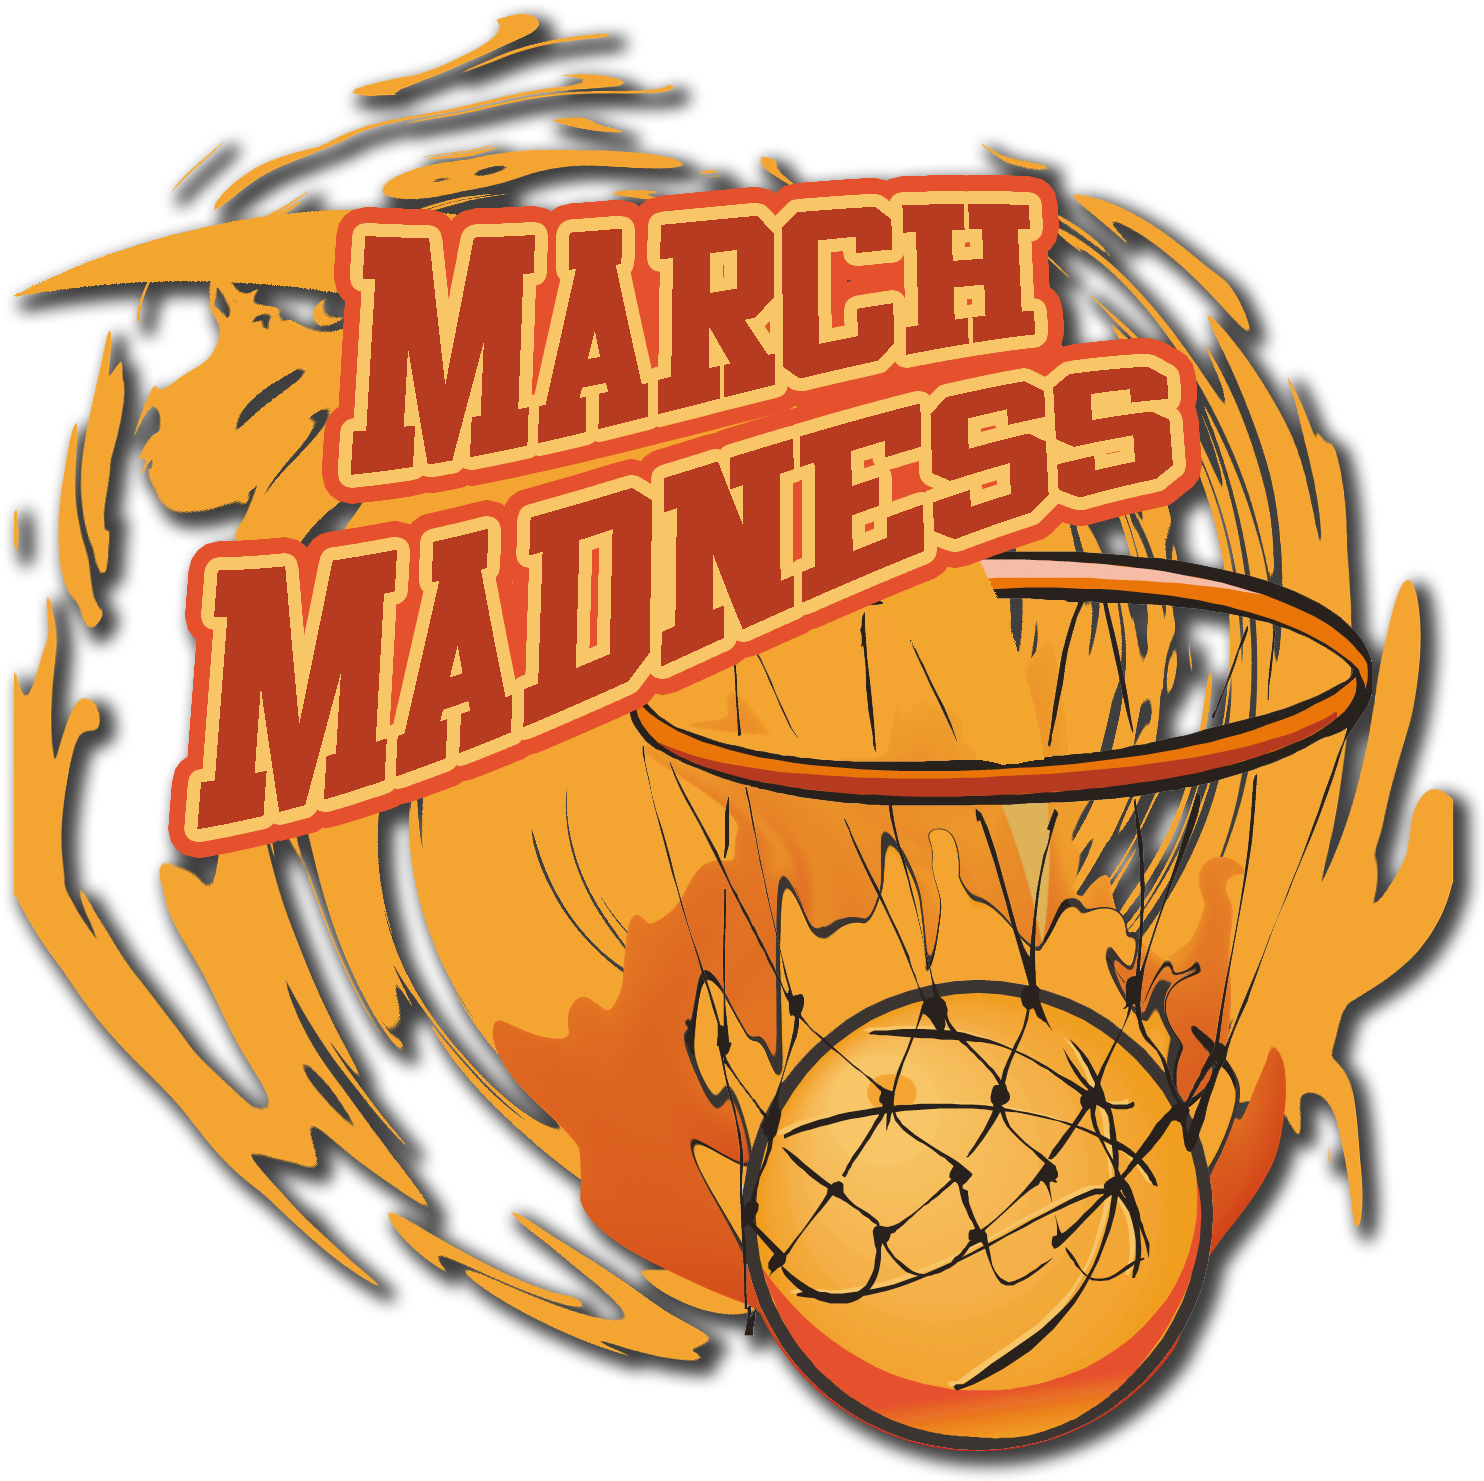 March Madness Basketball Graphic PNG